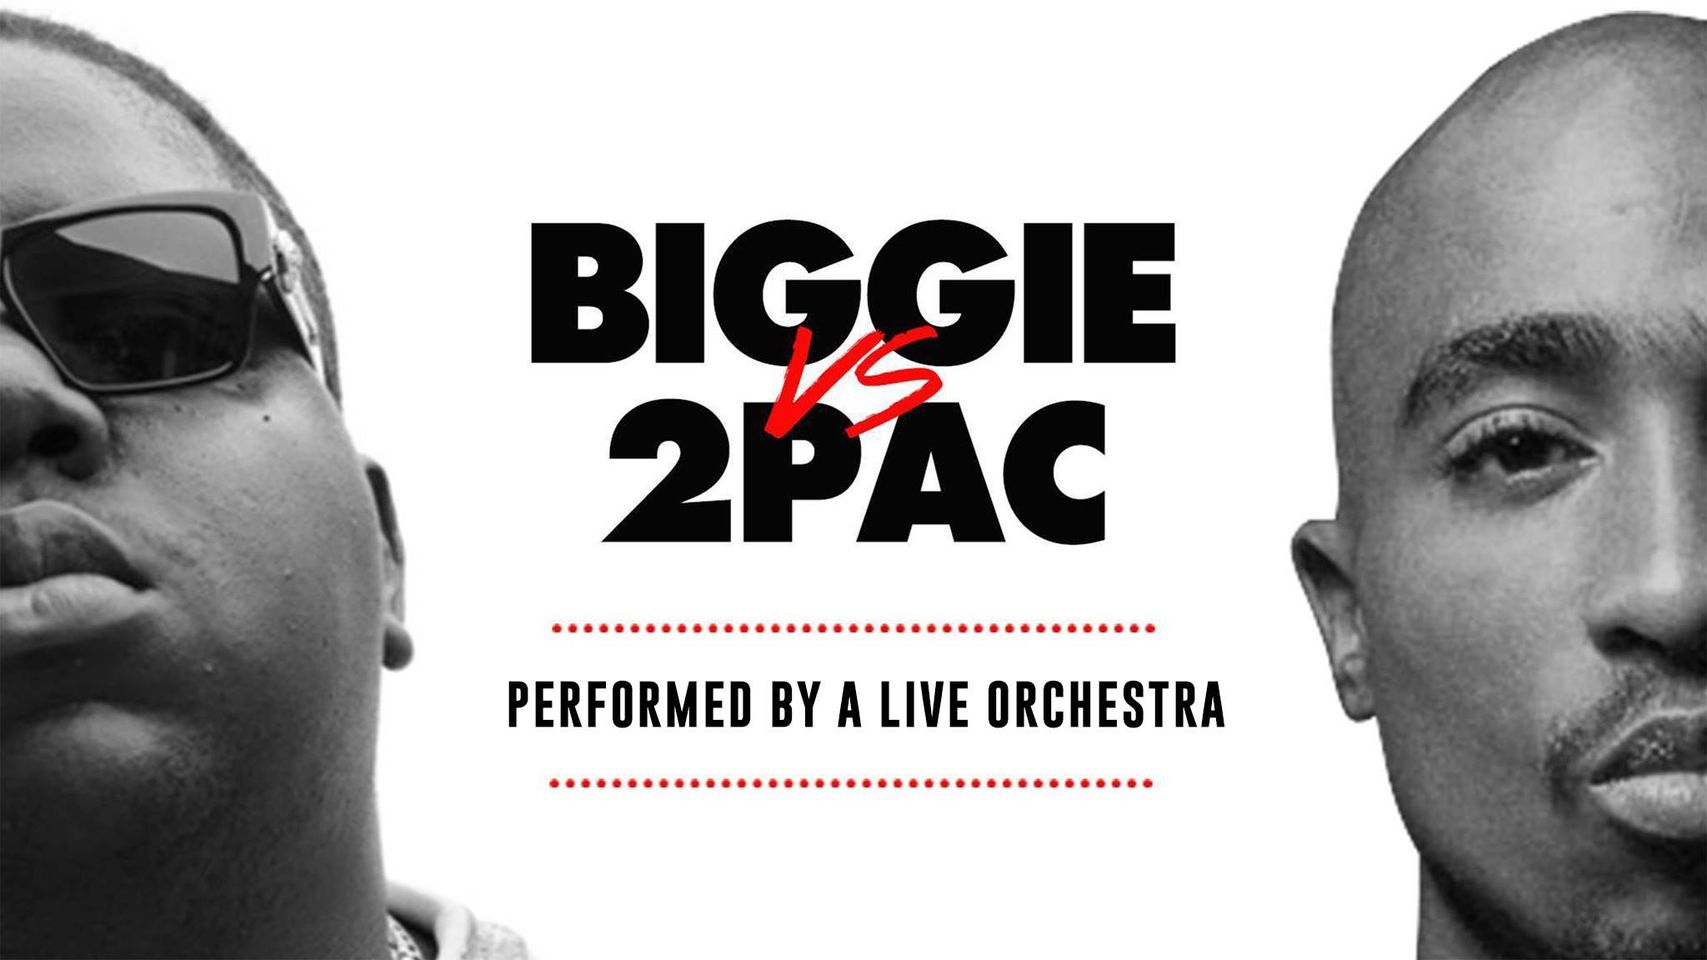 San Francisco : An Orchestral Rendition of Biggie vs 2PAC